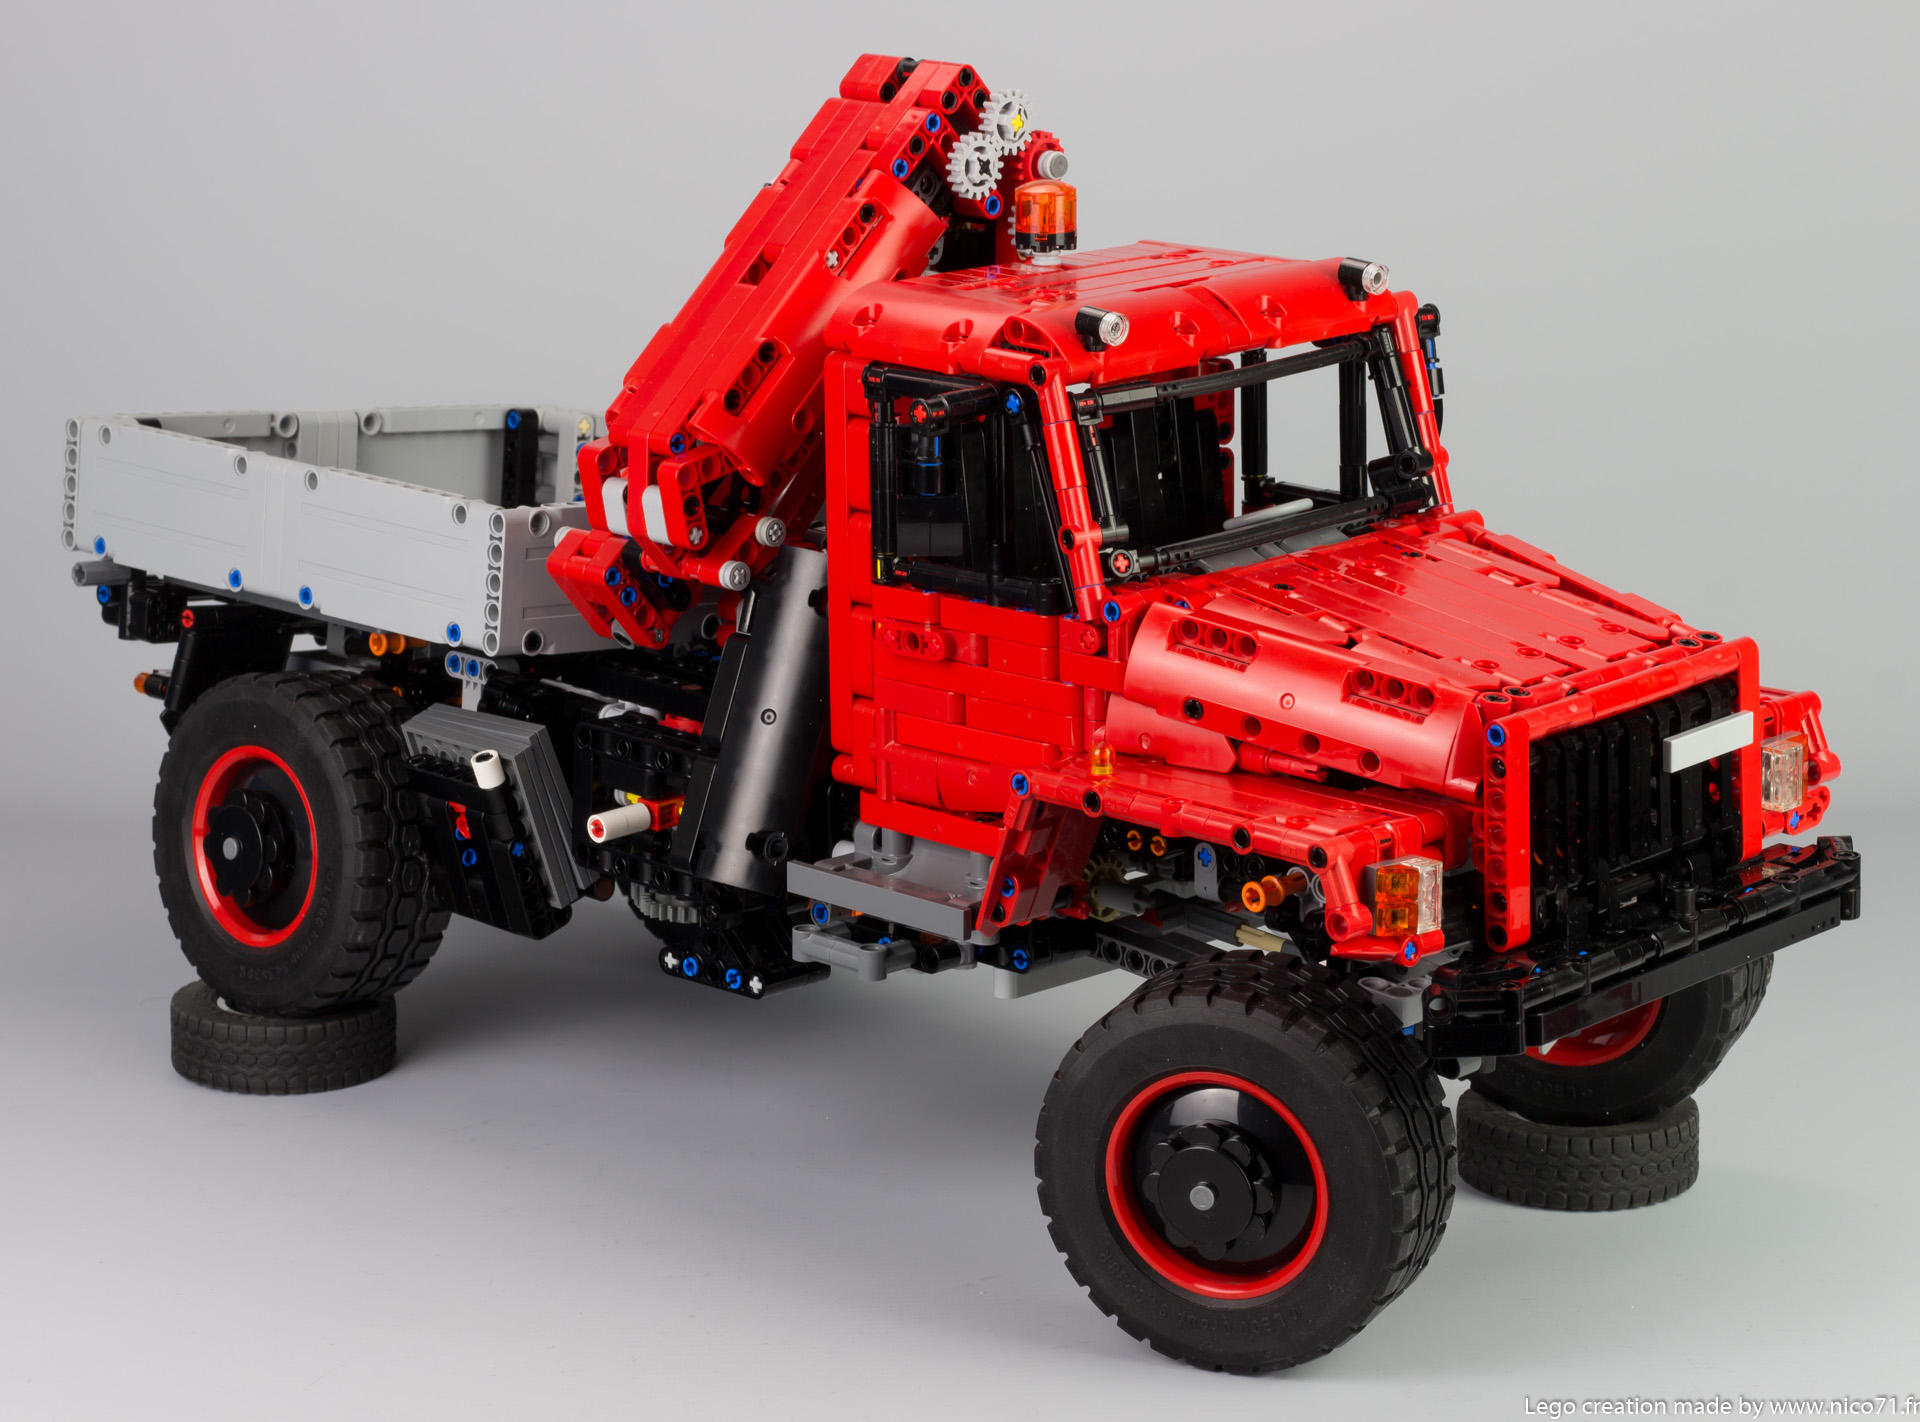 LEGO MOC 42082 Model E - Offroad Truck by Nico71 | Rebrickable - Build with LEGO